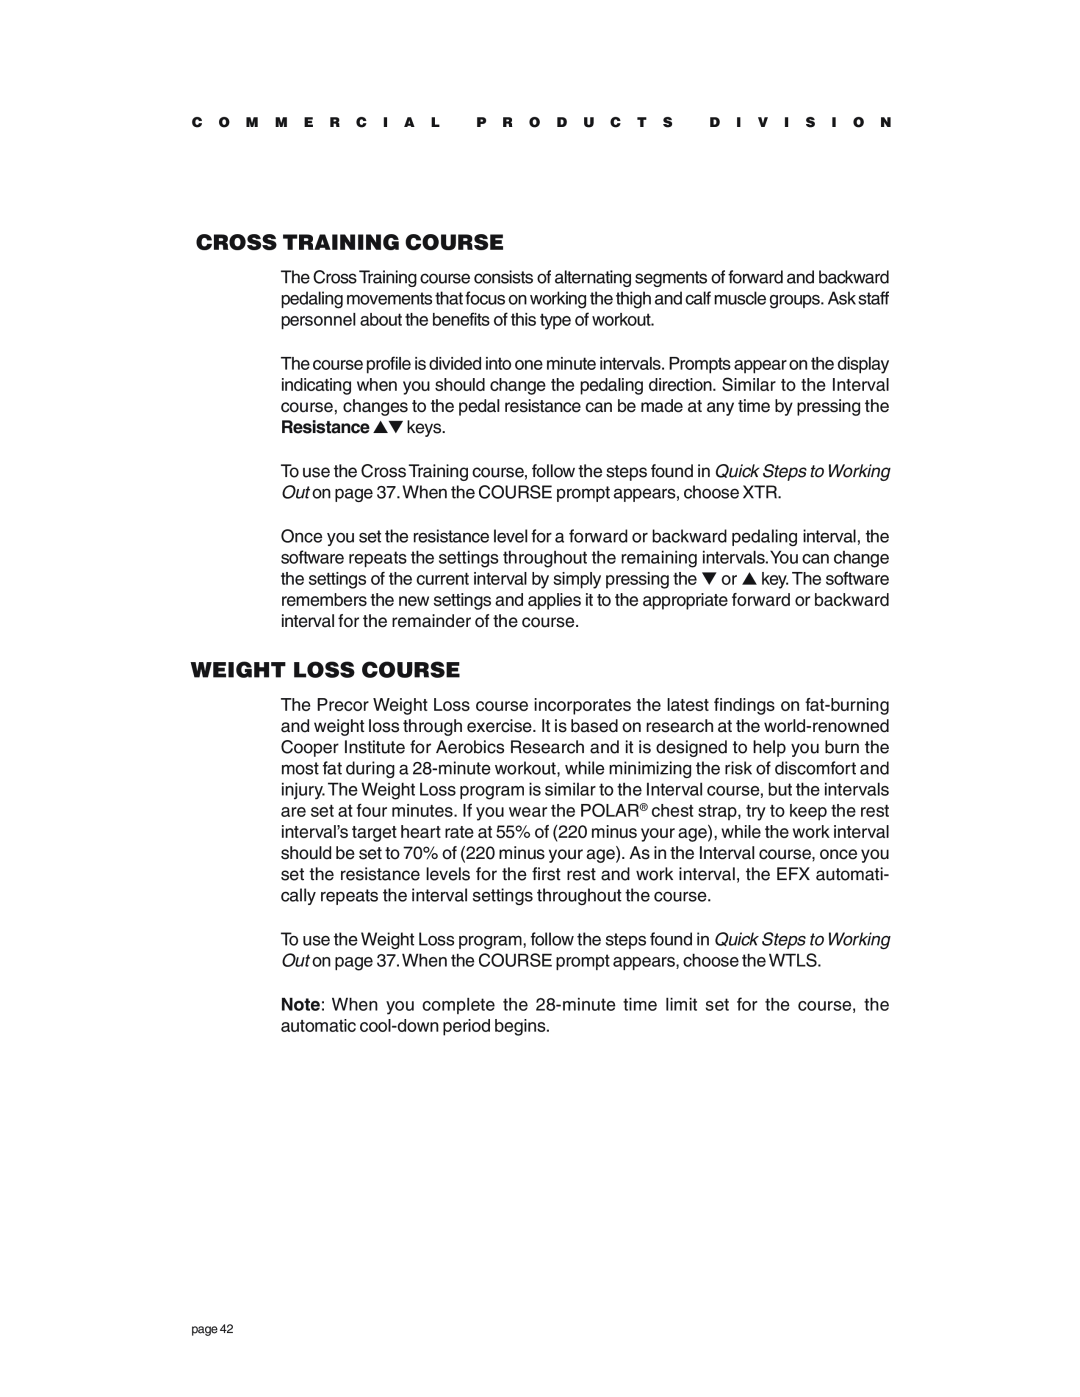 Precor EFX534 owner manual Cross Training Course, Weight Loss Course 